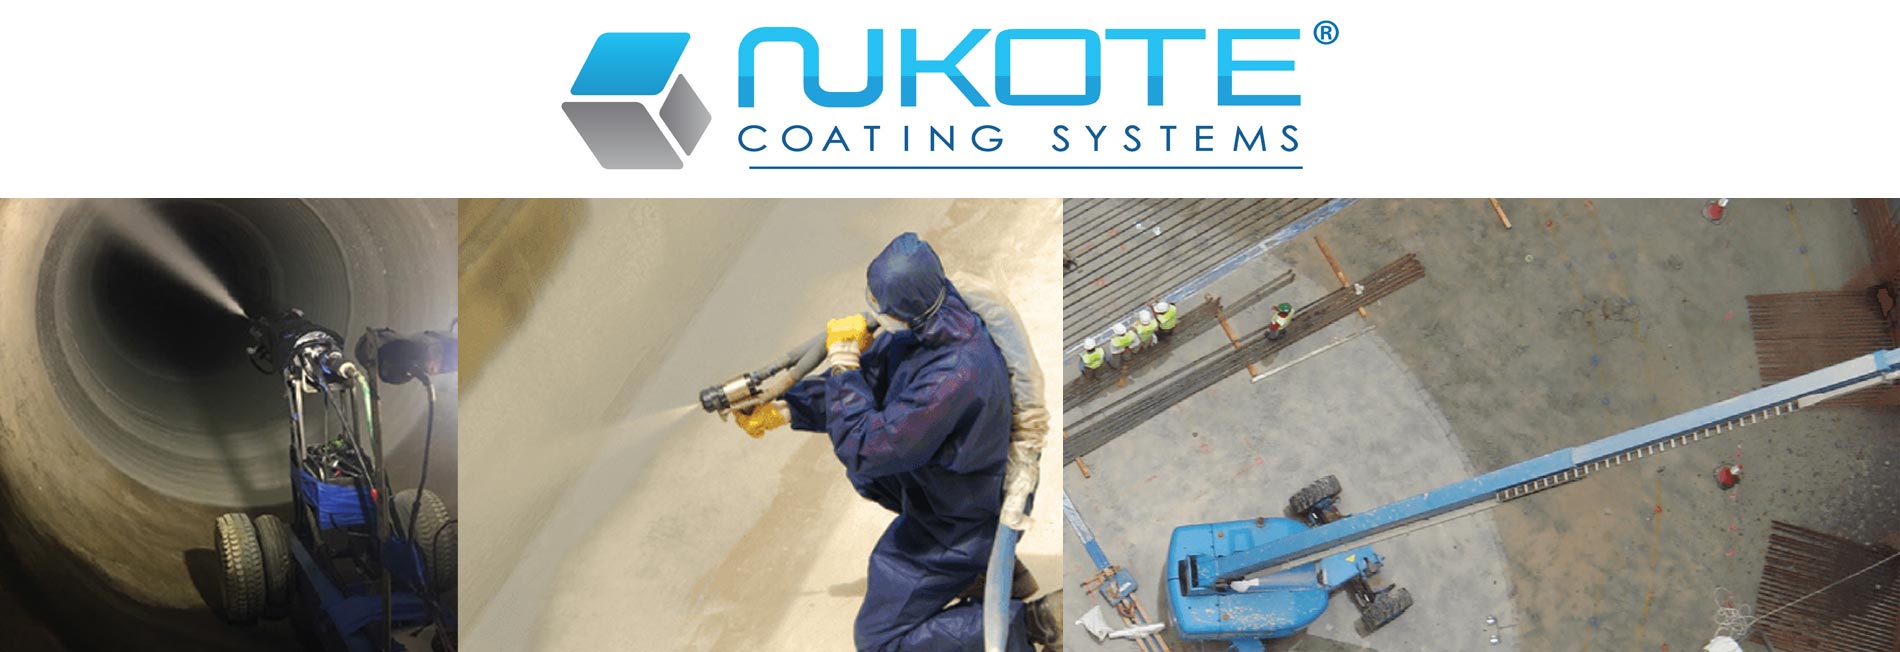 Pacific Urethanes Announces Strategic Partnership With Nukote Coating Systems International